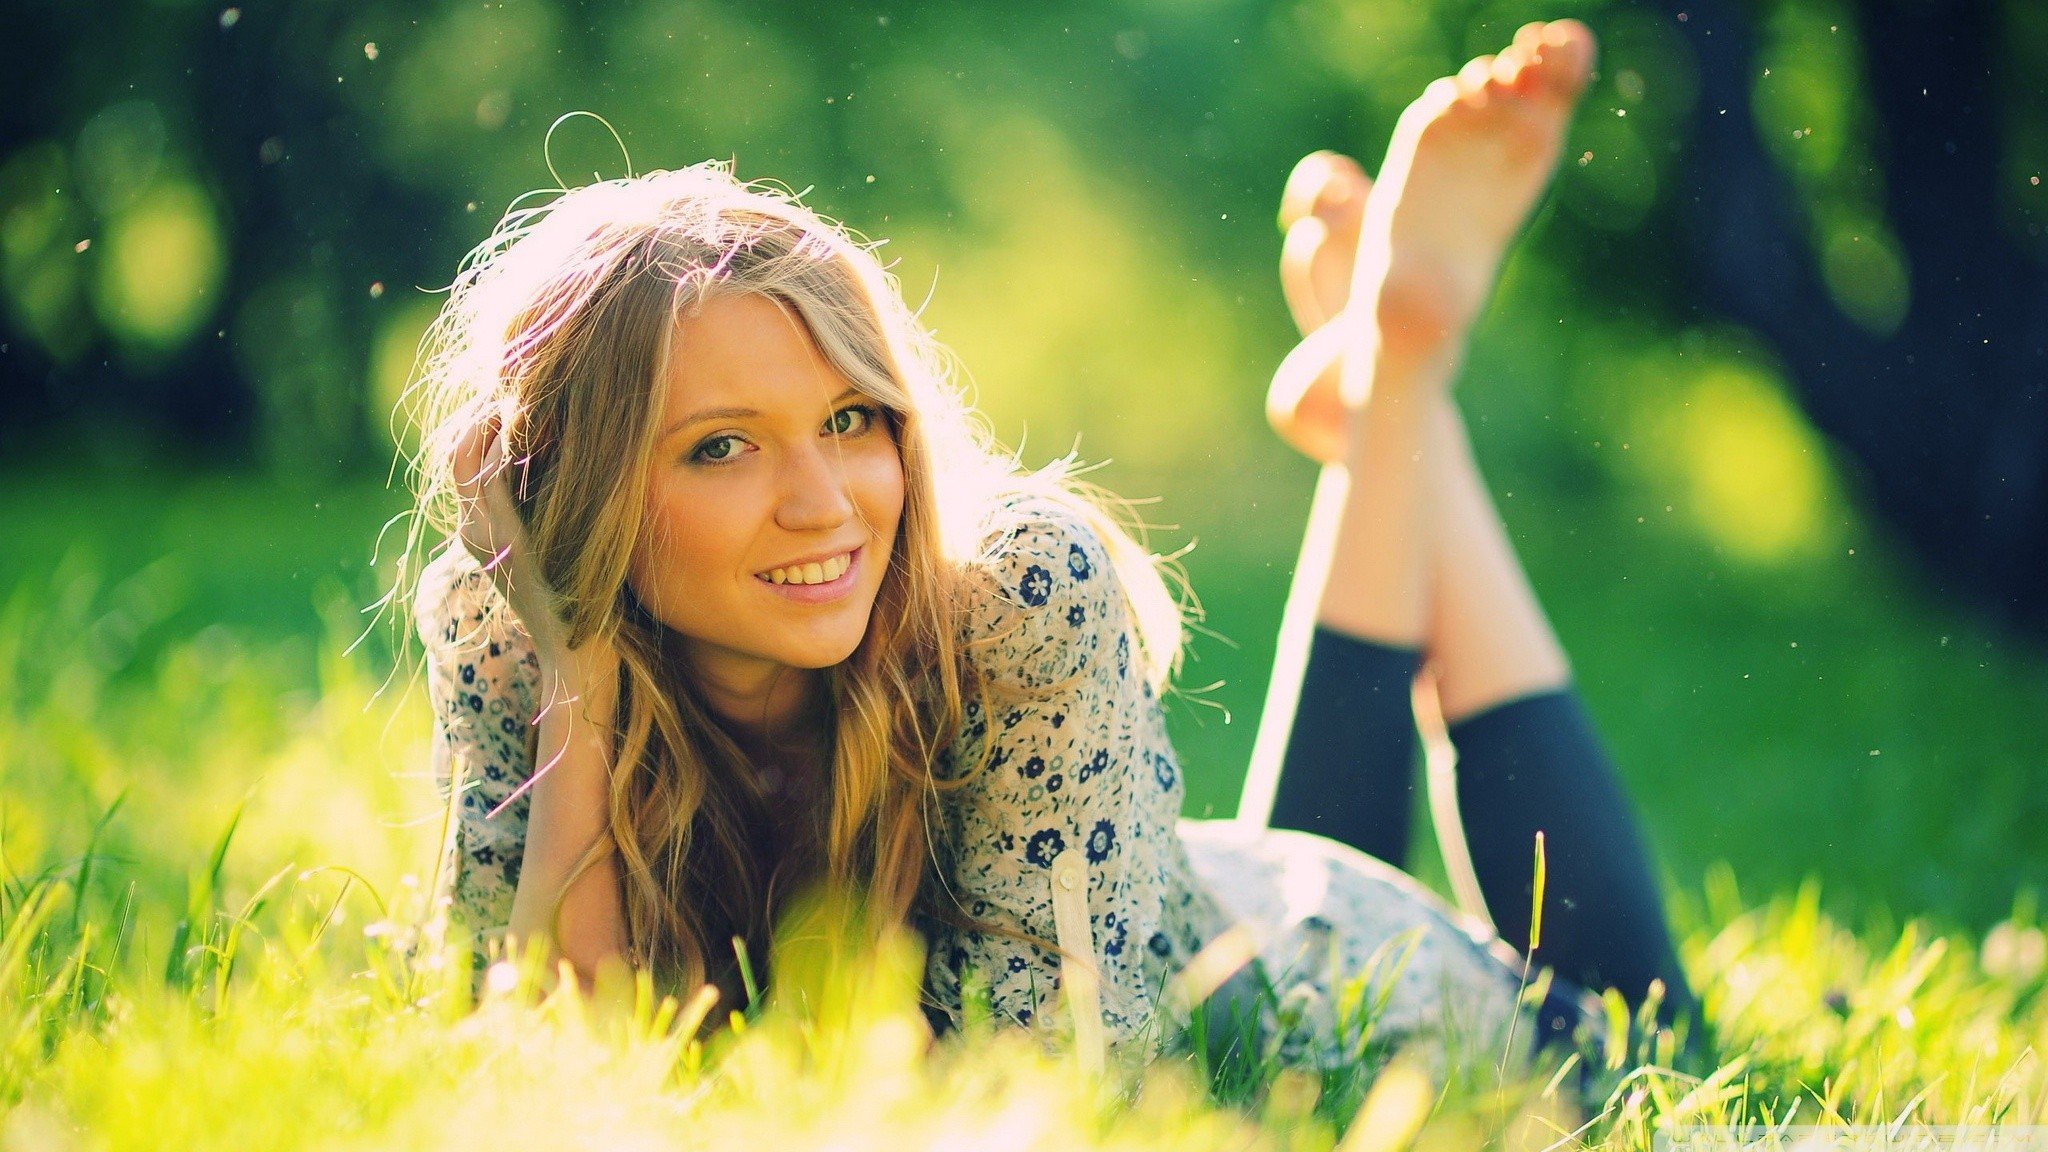 Diana Vickers, Women outdoors, Hands on head, Barefoot, Grass, Blonde, Legs up, Depth of field, Smiling Wallpaper